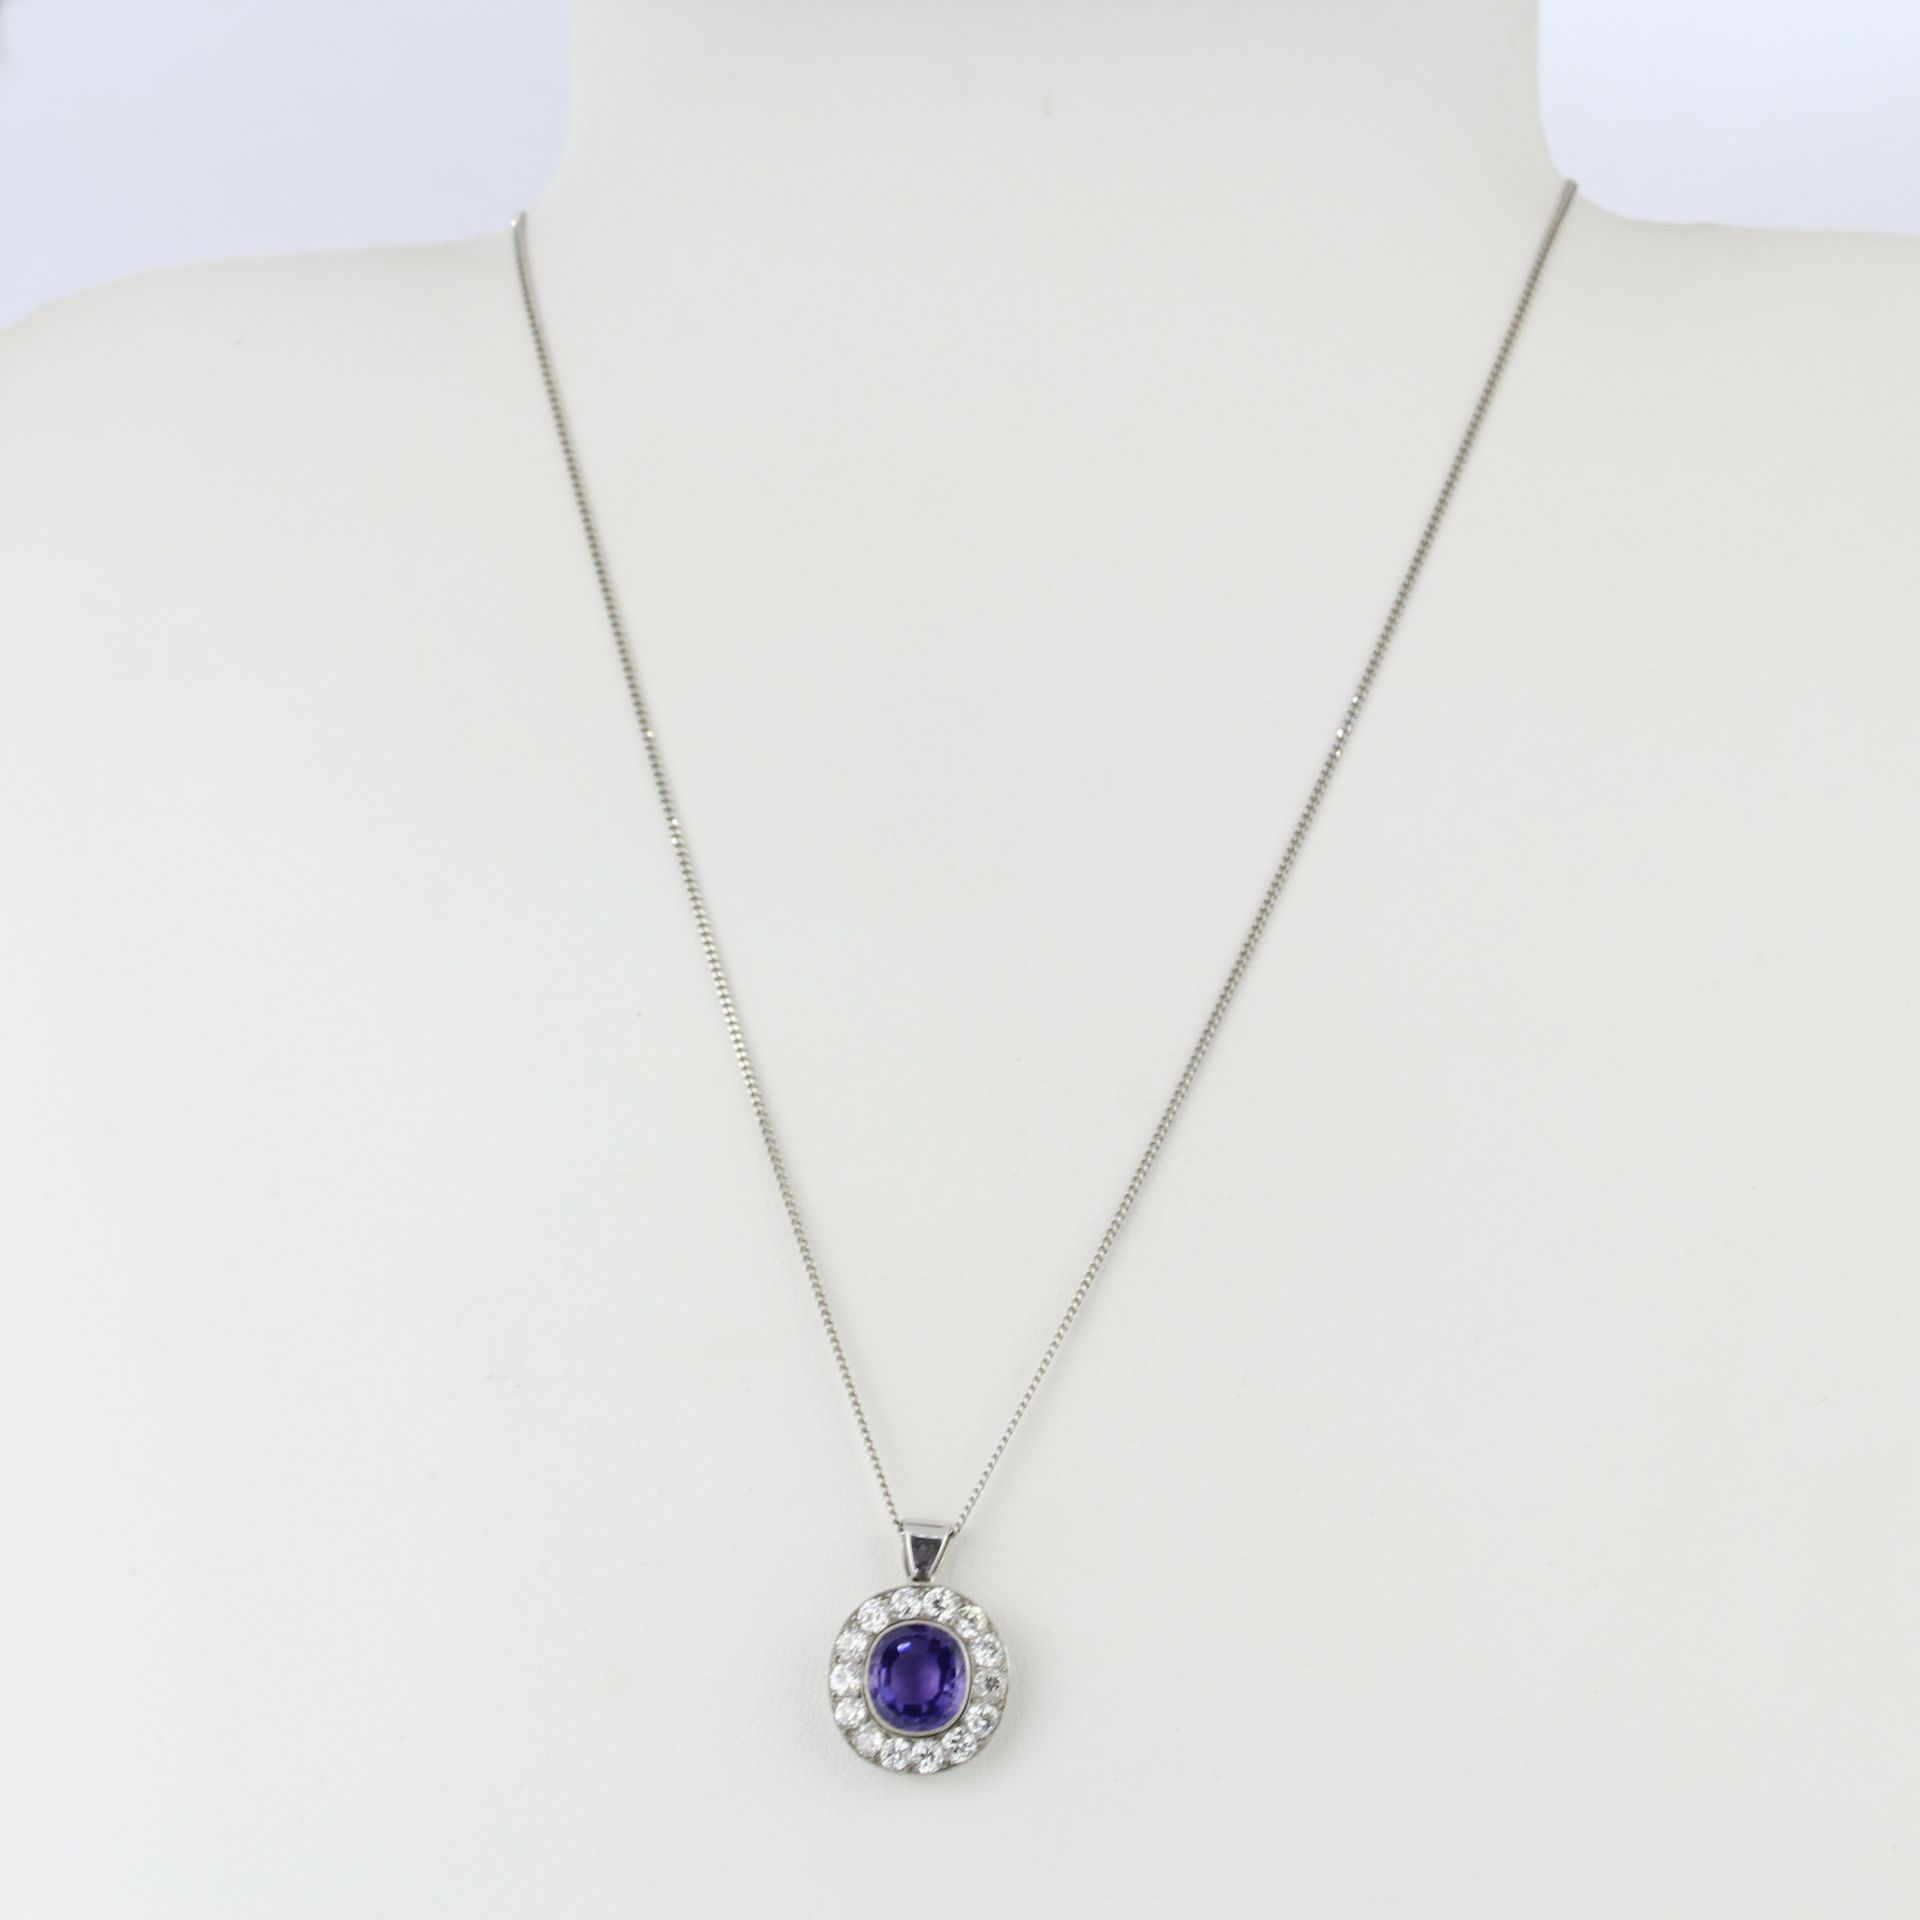 A white metal (tested minimum 9ct gold) pendant set with an oval cut purplish sapphire surrounded by - Image 3 of 4